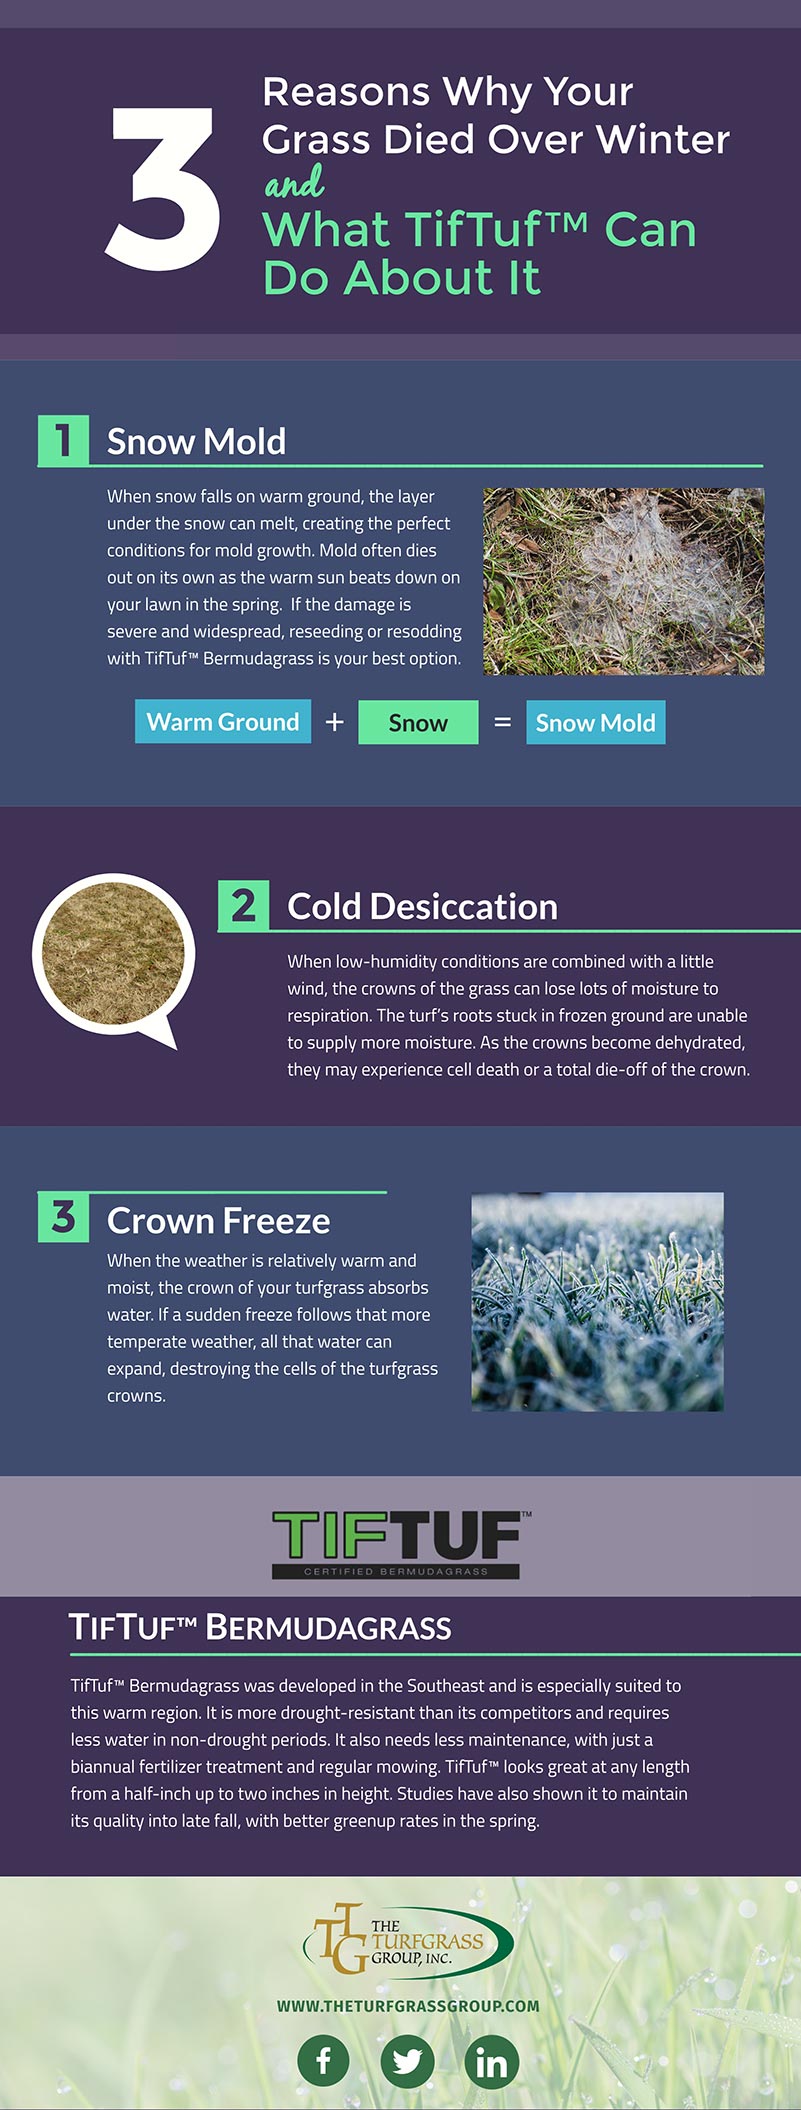 Why Your Grass Died Over Winter [infographic]